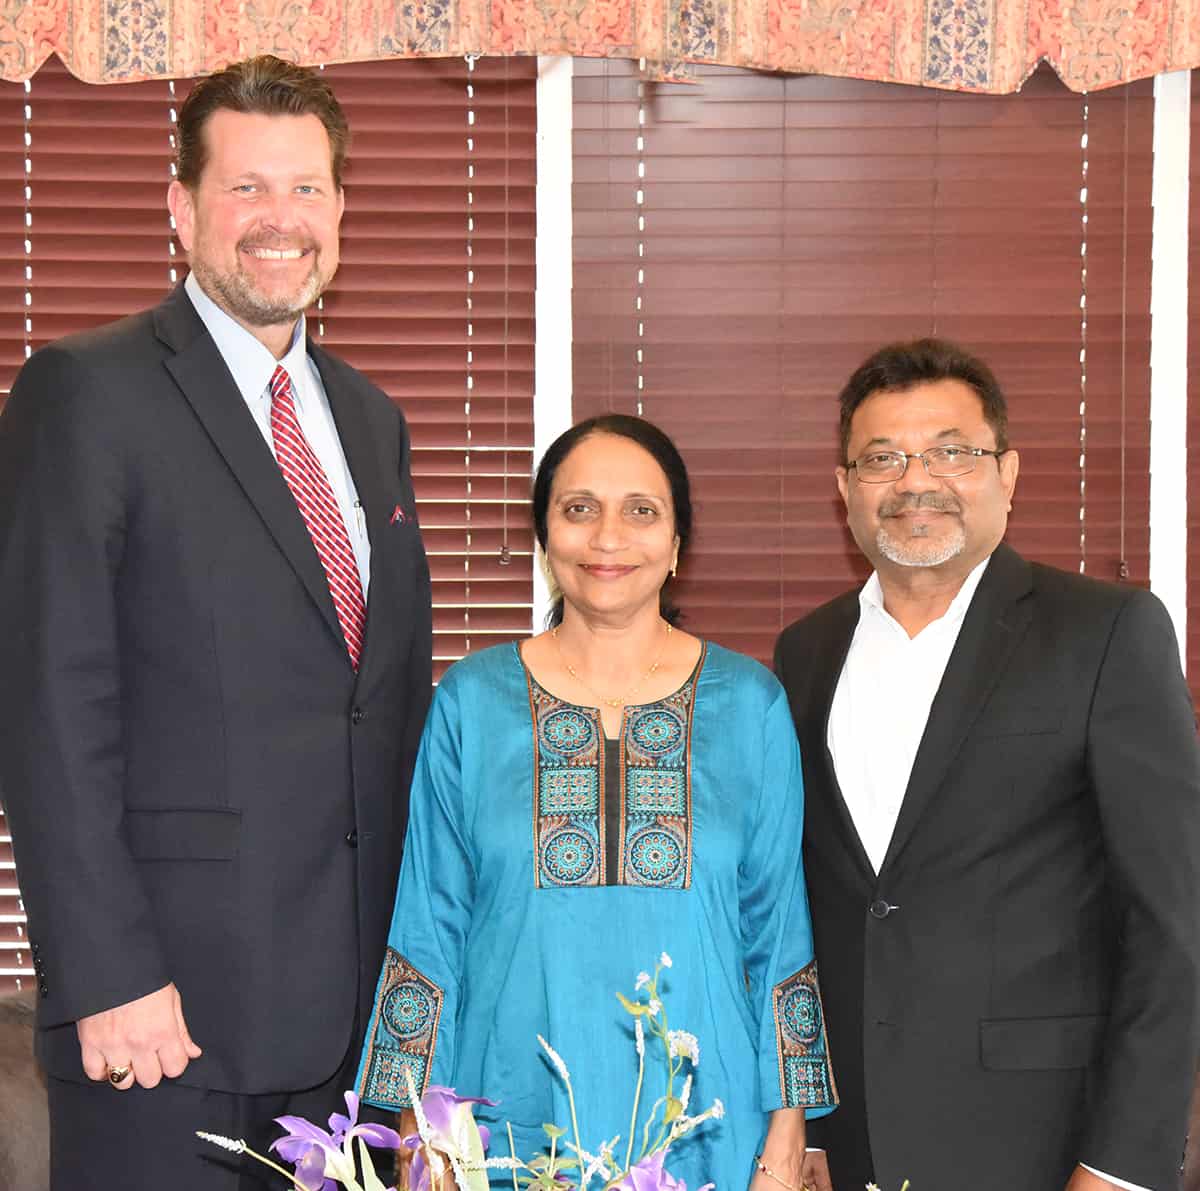 South Georgia Technical College President Dr. John Watford (l to r) is shown above thanking Ila and Sharad Patel for their new endowed scholarship for Culinary Arts students at South Georgia Technical College.